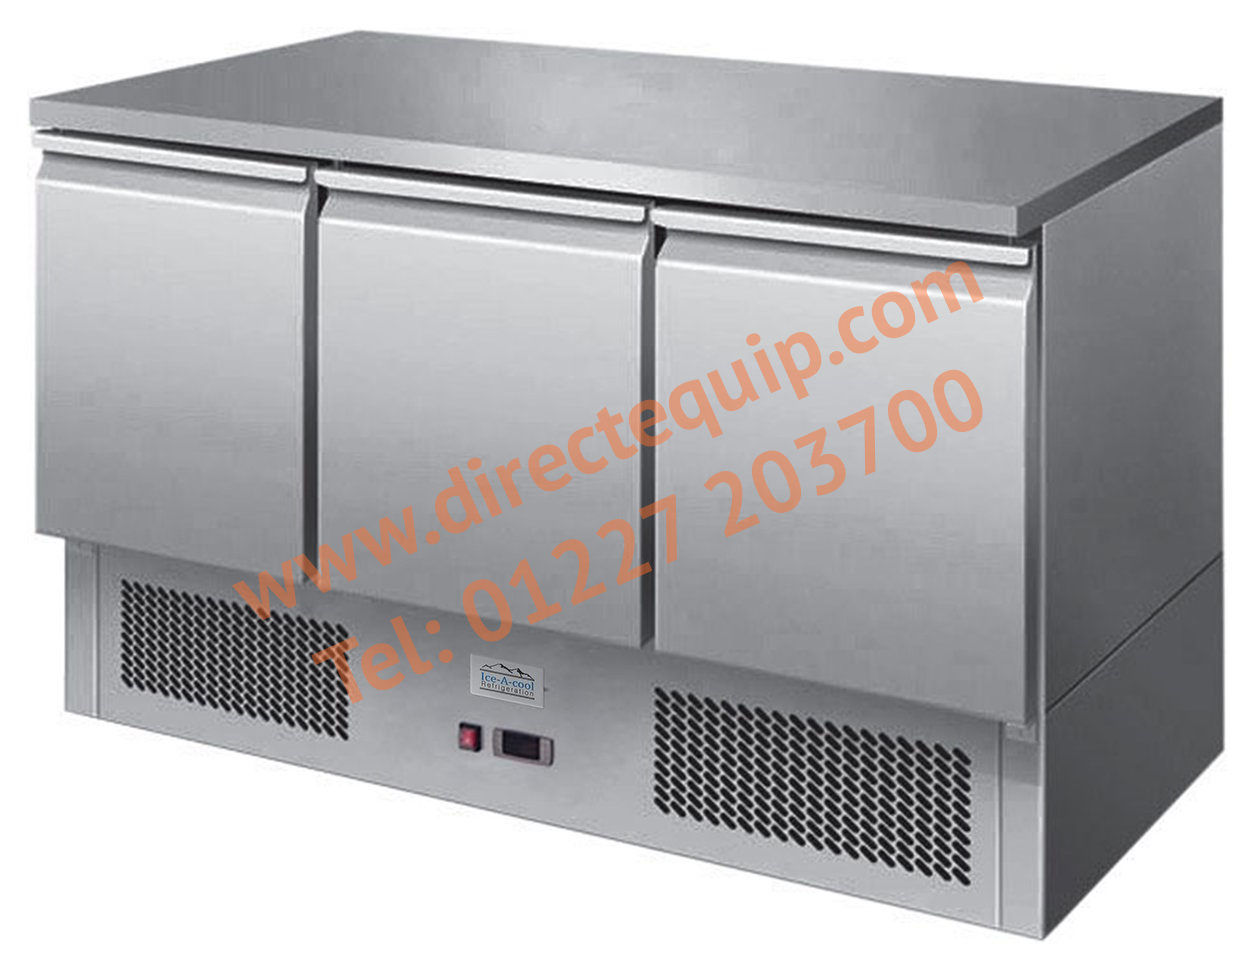 Ice-A-Cool 3 Door Counter Refrigeration ICE3851GR